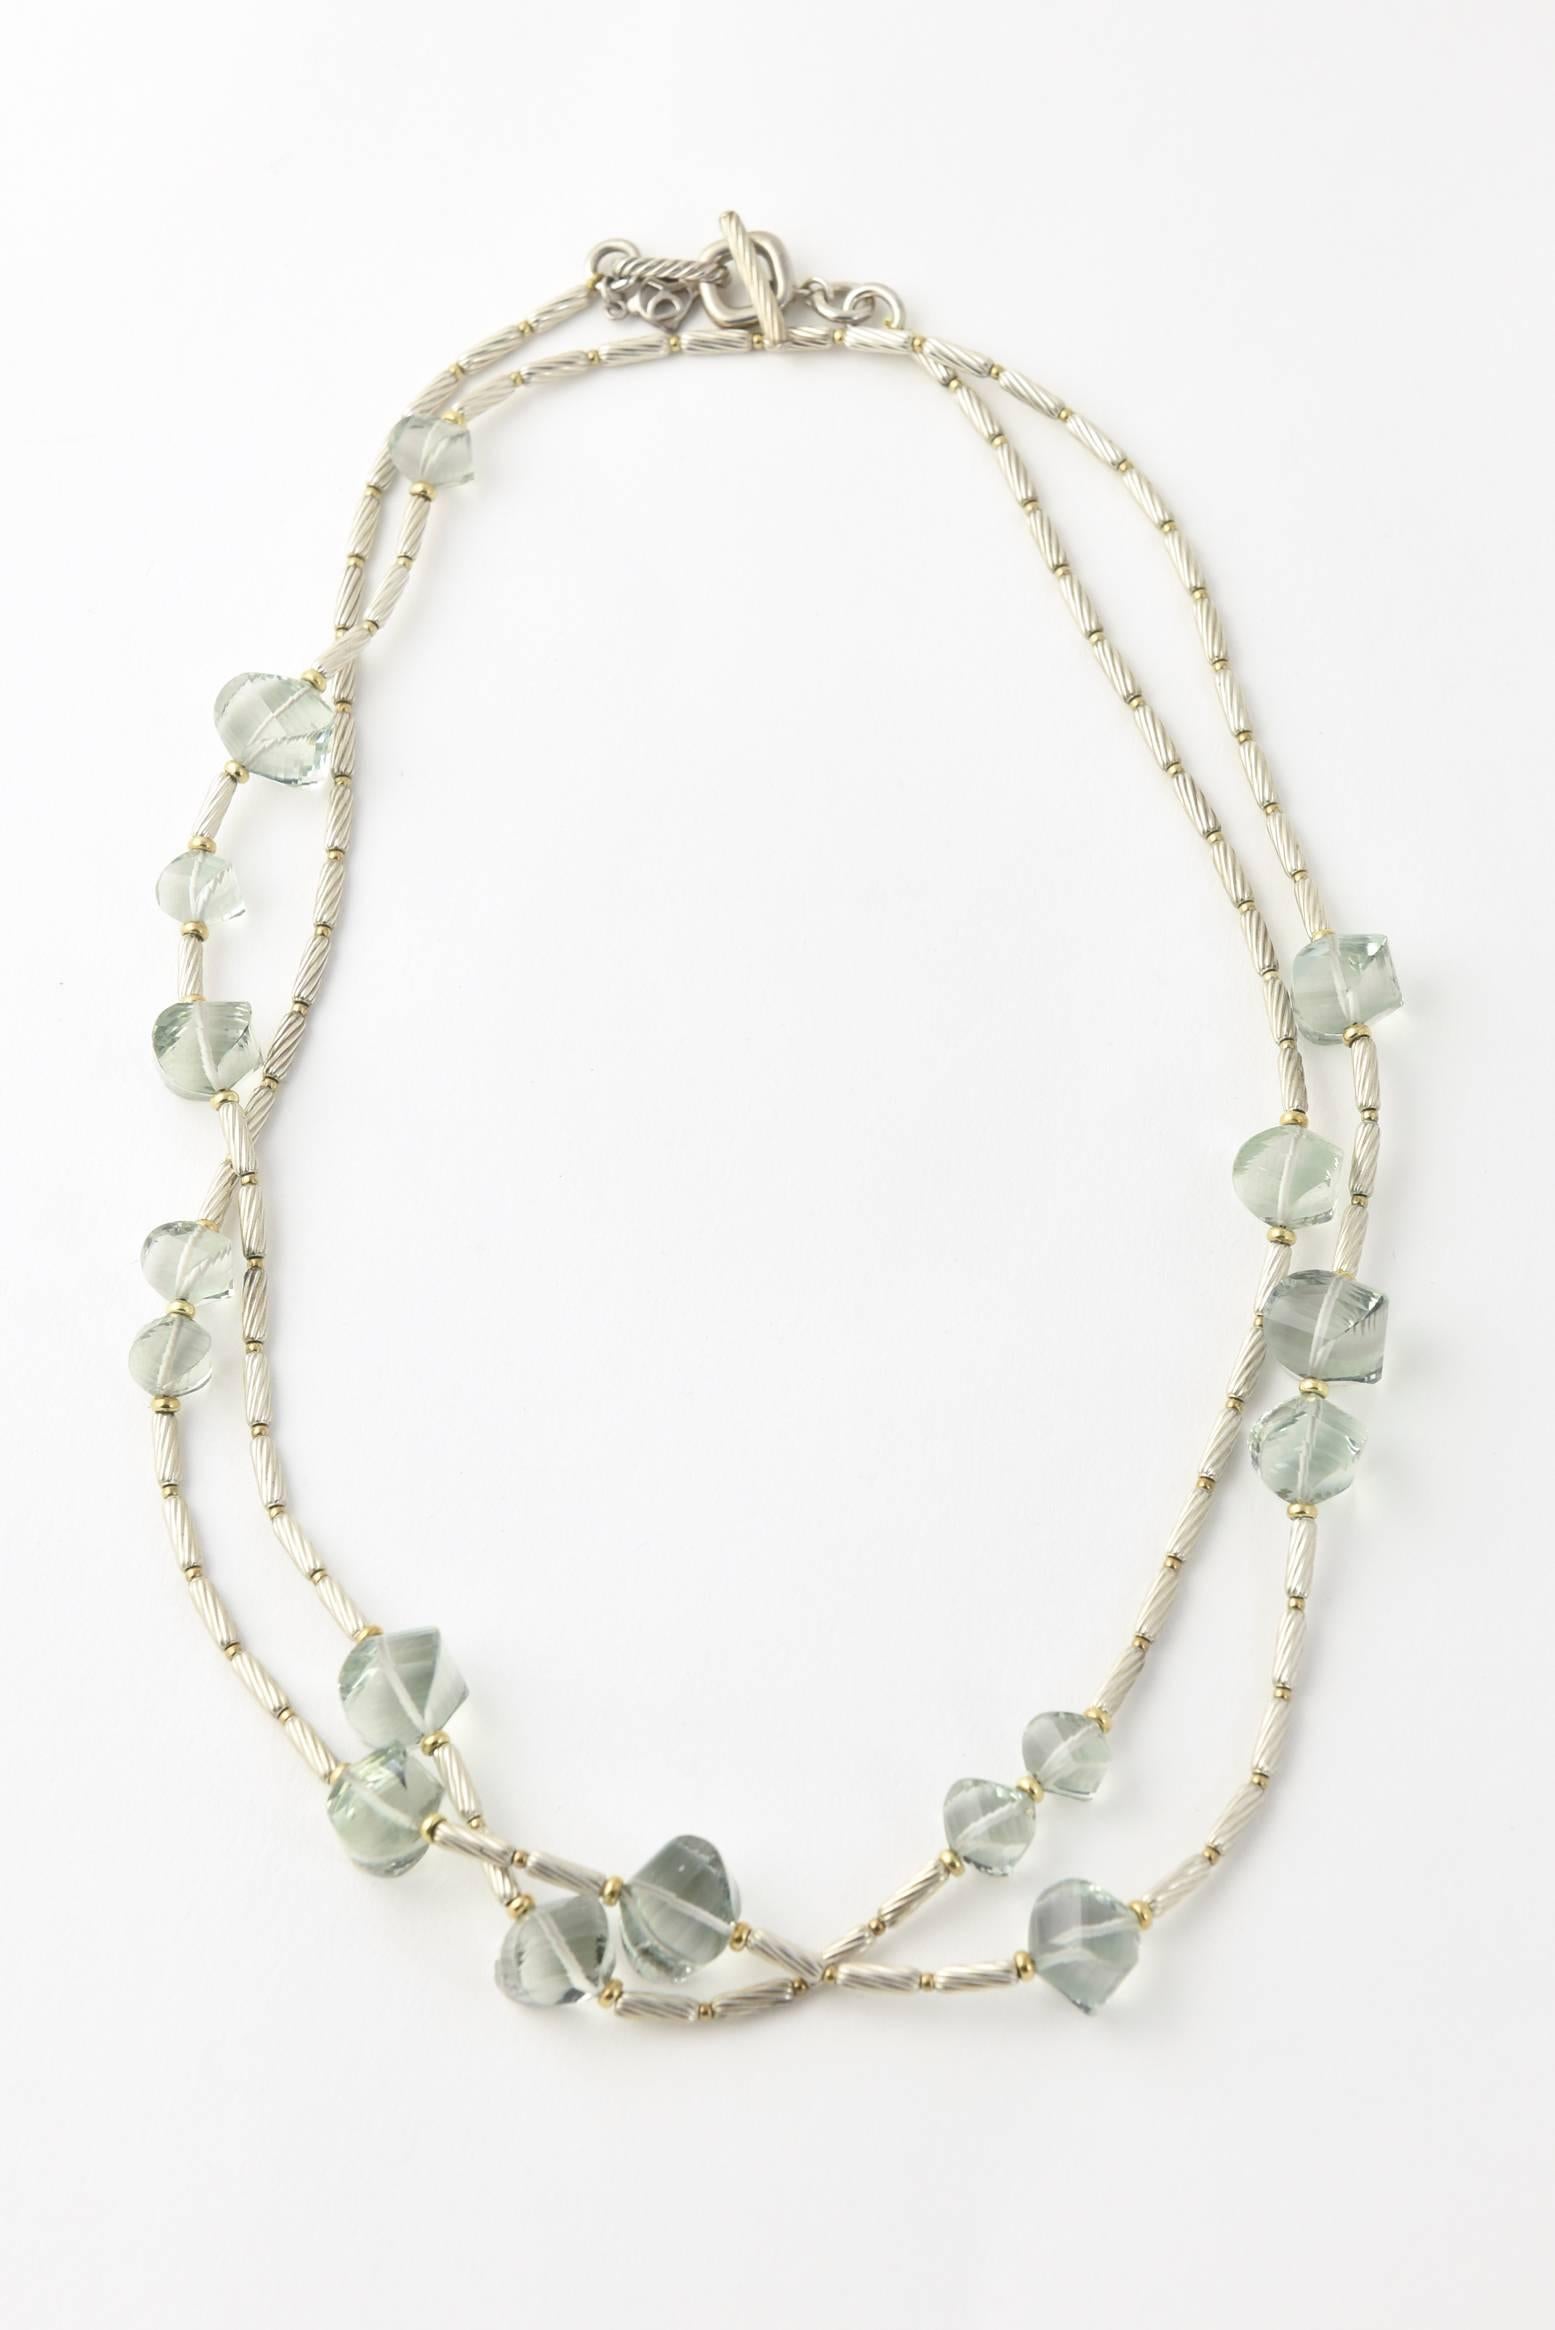 18K yellow gold and sterling silver David Yurman tone-tone necklace featuring beaded prasiolite stations with toggle closure.

Marked with Yurman hallmark, 925 and 750